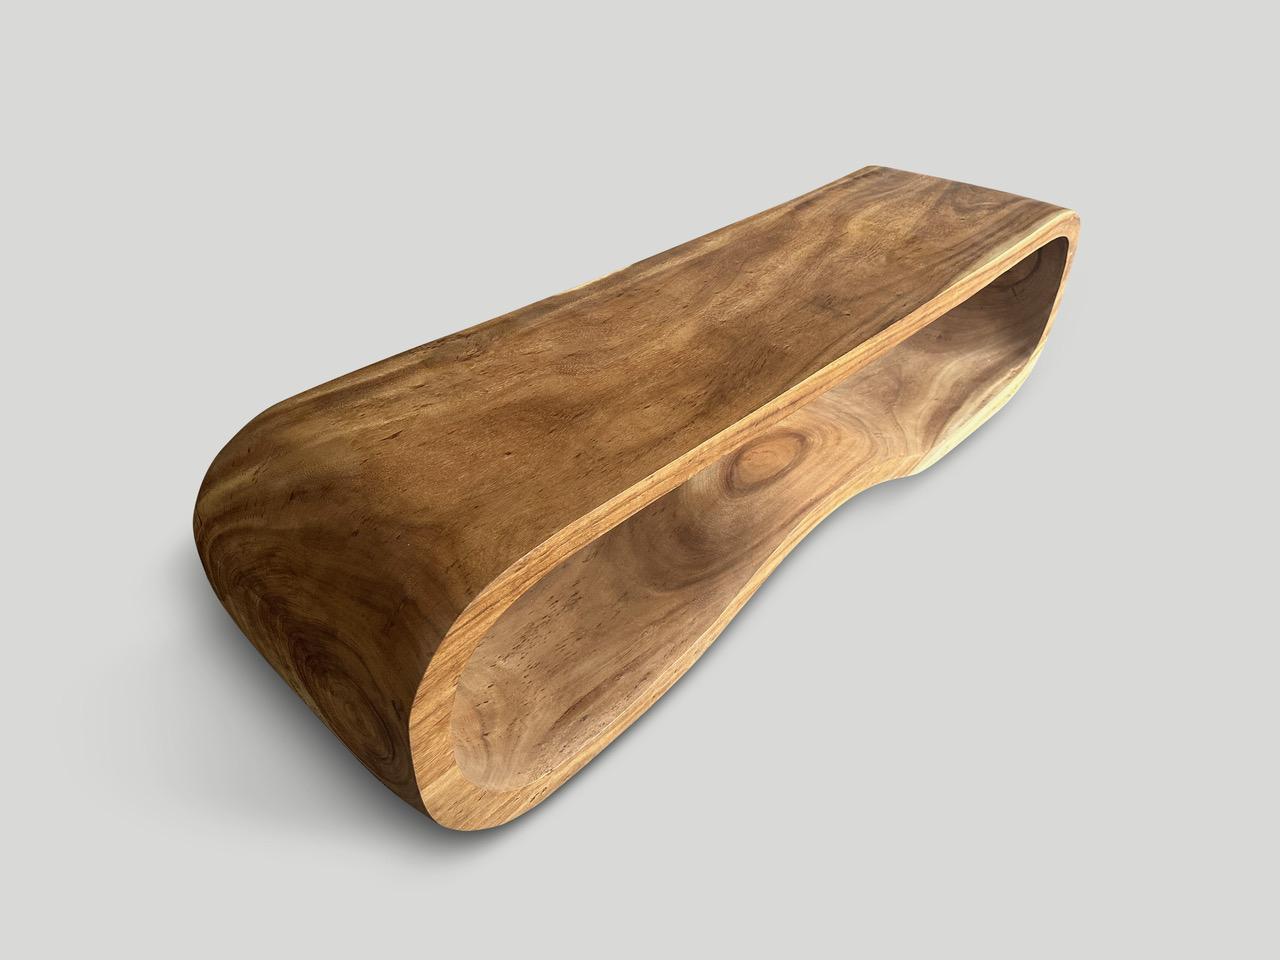 Impressive one of a kind bench or coffee table hand carved seamlessly from a single piece of suar wood. Finished with a natural oil revealing the beautiful wood grain. Both usable and sculptural.

Own an Andrianna Shamaris original.

Andrianna